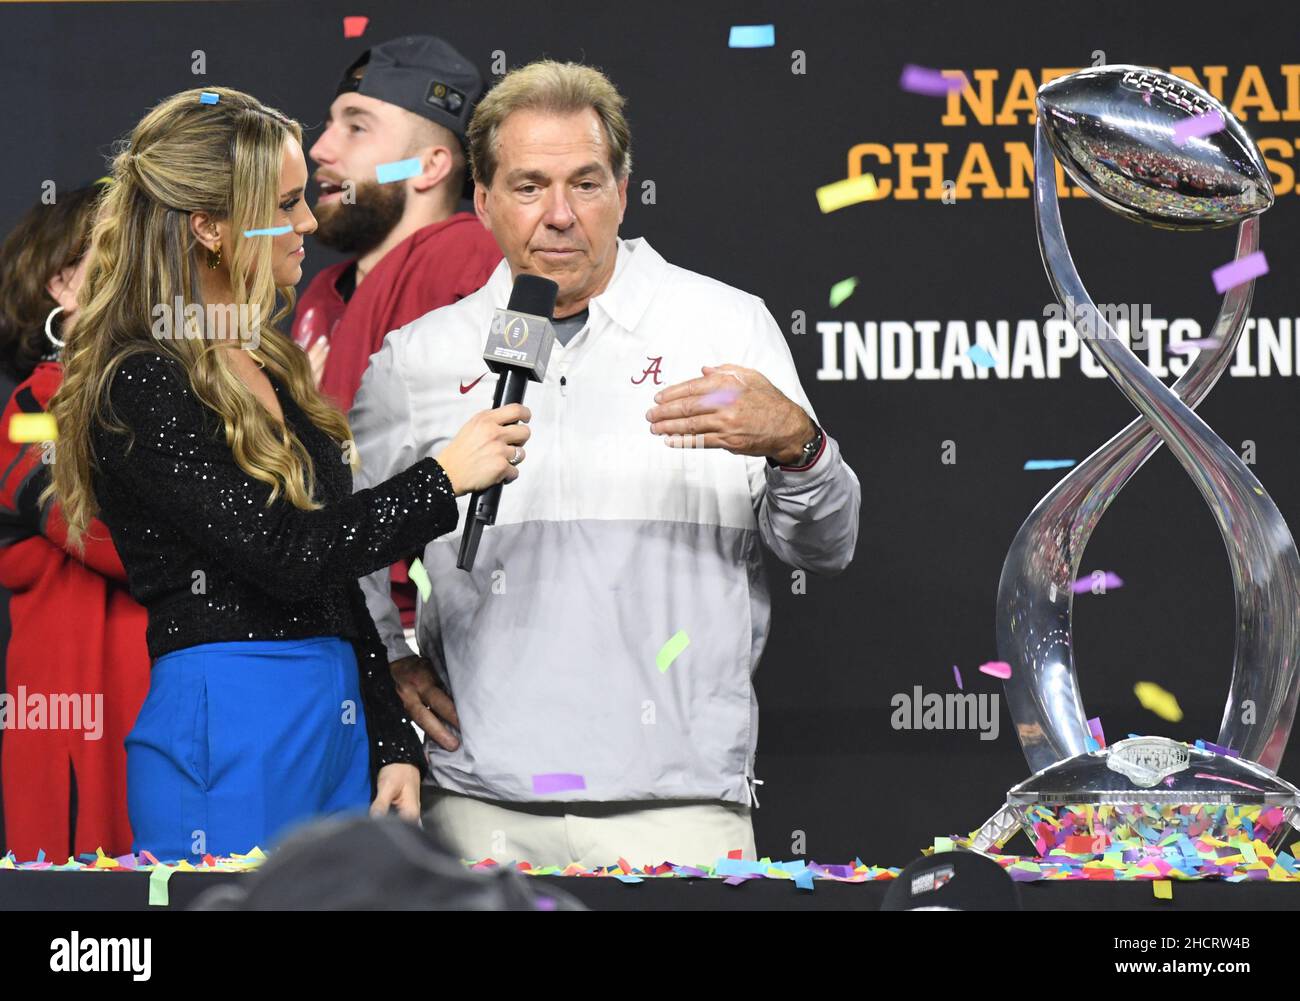 Arlington, USA. 31st Dec, 2021. Alabama head coach Nick Saban talks to fans after beating Cincinnati 27-6 in the 2021 Cotton Bowl Classic, one of the College Football Playoff Semifinal games, on Friday, December 31, 2021 at AT&T Stadium in Arlington, Texas. The Tide won 27-6 and will play for the national championship on January 10, 2022. Photo by Ian Halperin/UPI Credit: UPI/Alamy Live News Stock Photo